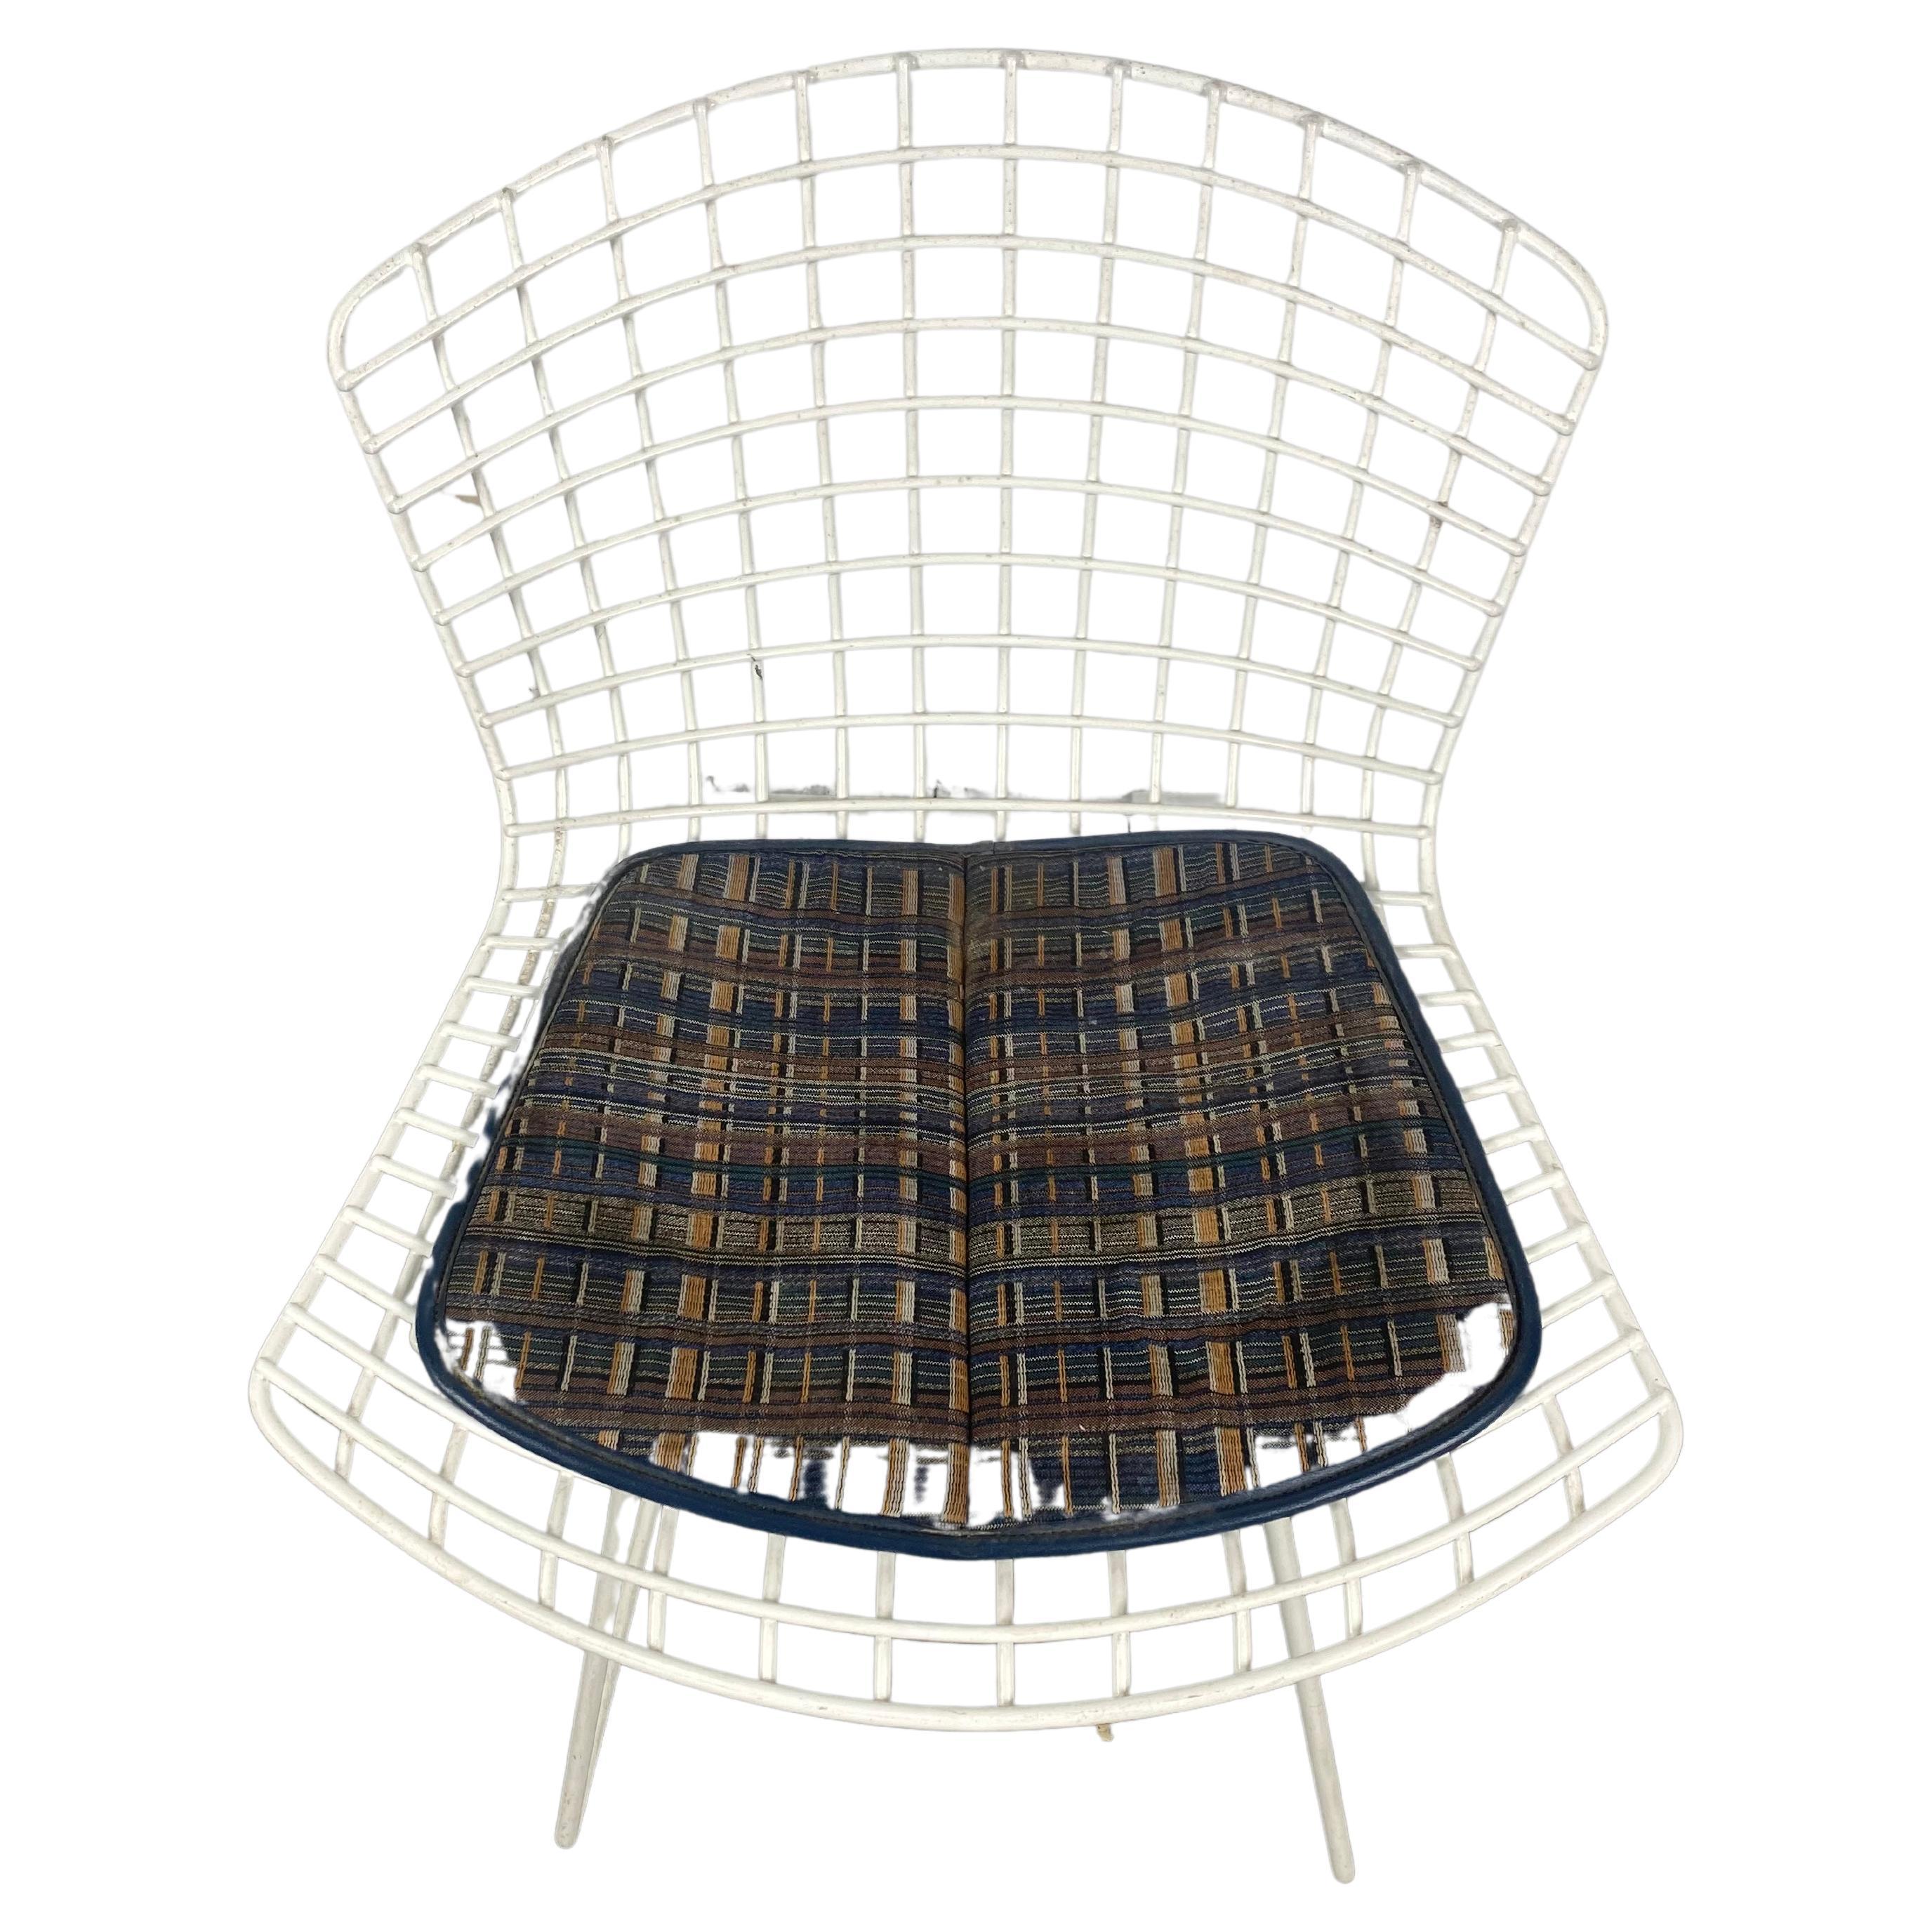 Classic Vintage Modern Industrial HARRY BERTOIA Wire side chair white 1952
Dimensions: 29.5 x 22.25 D x 18 W
Amazing original condition, custom Knoll fabric seat cushion.